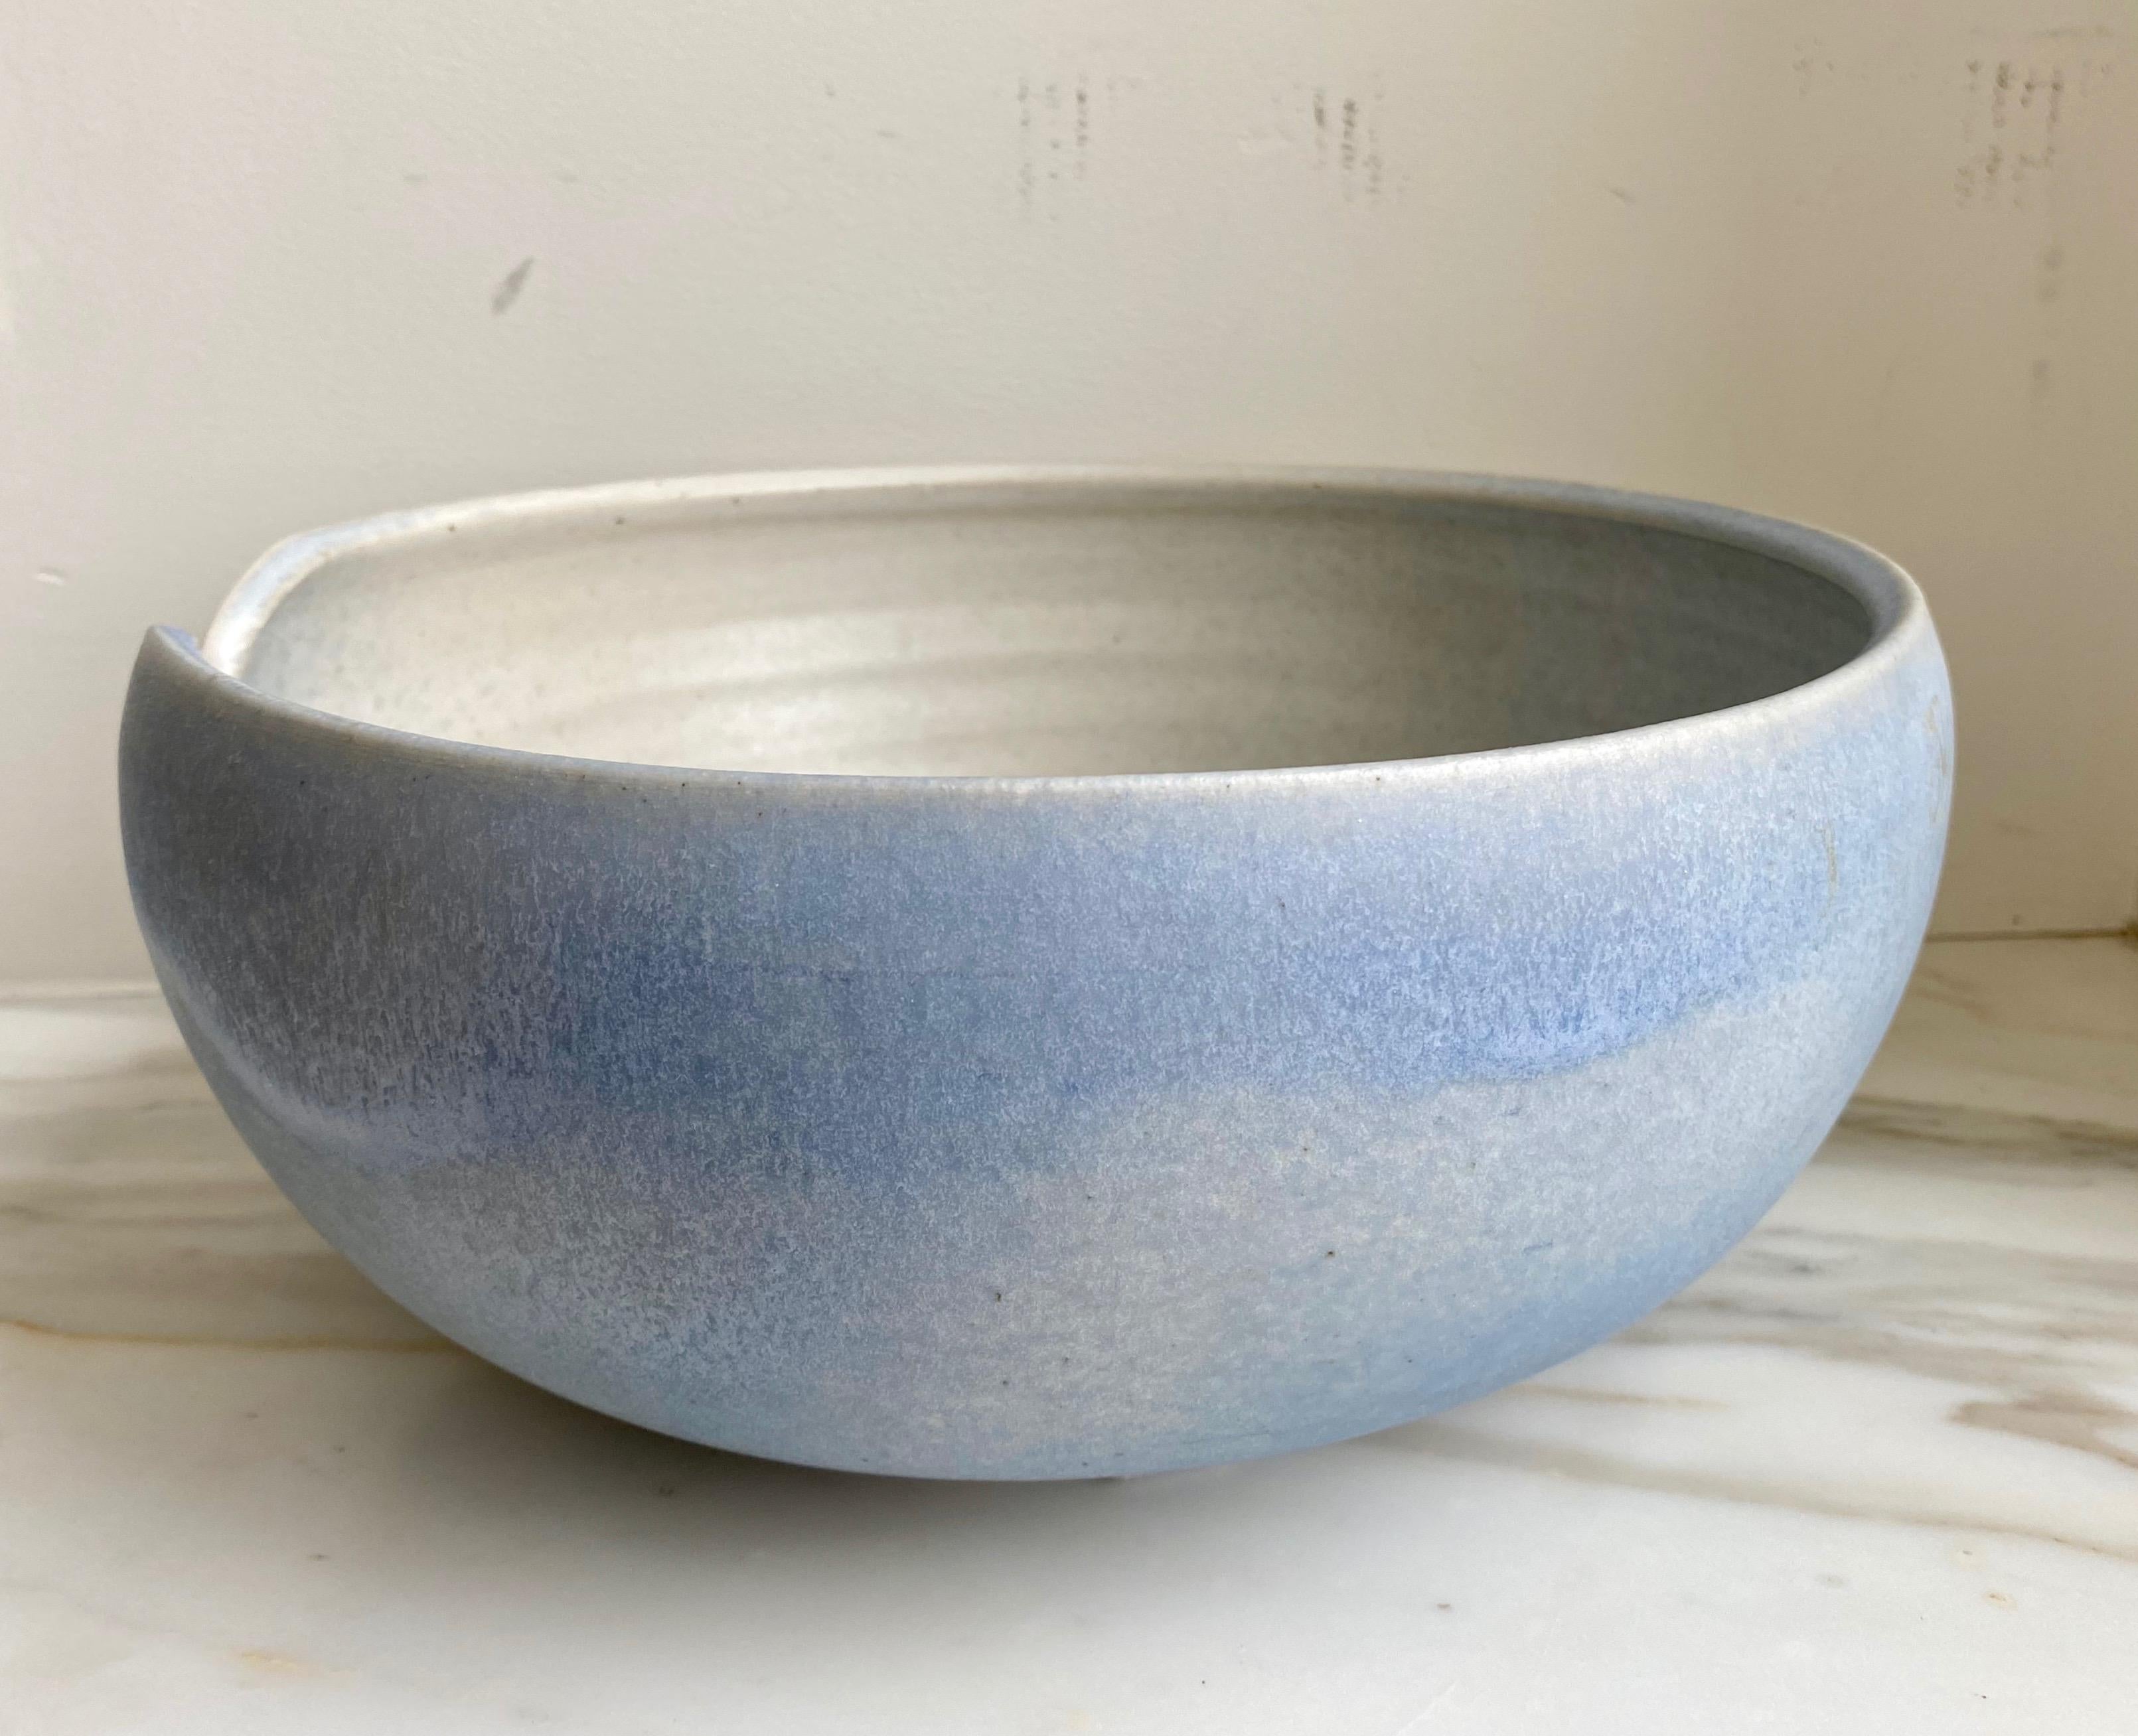 Modern bowl with blue and cream ombre glaze by Aage Würtz

Incised 